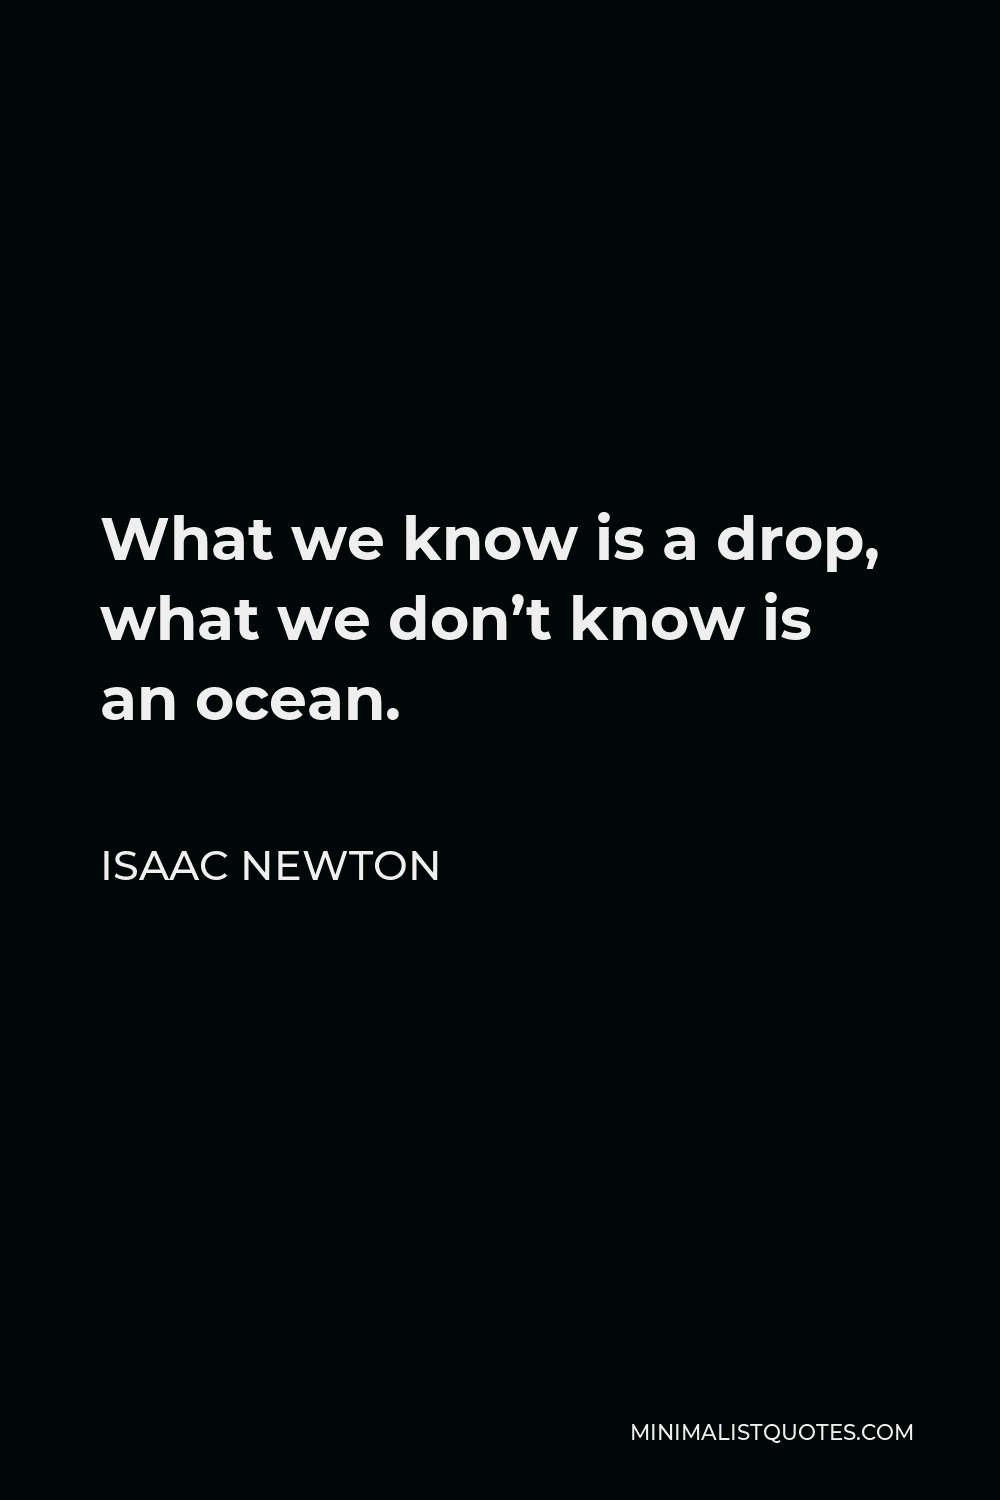 Isaac Newton Quote What We Know Is A Drop What We Don T Know Is An Ocean